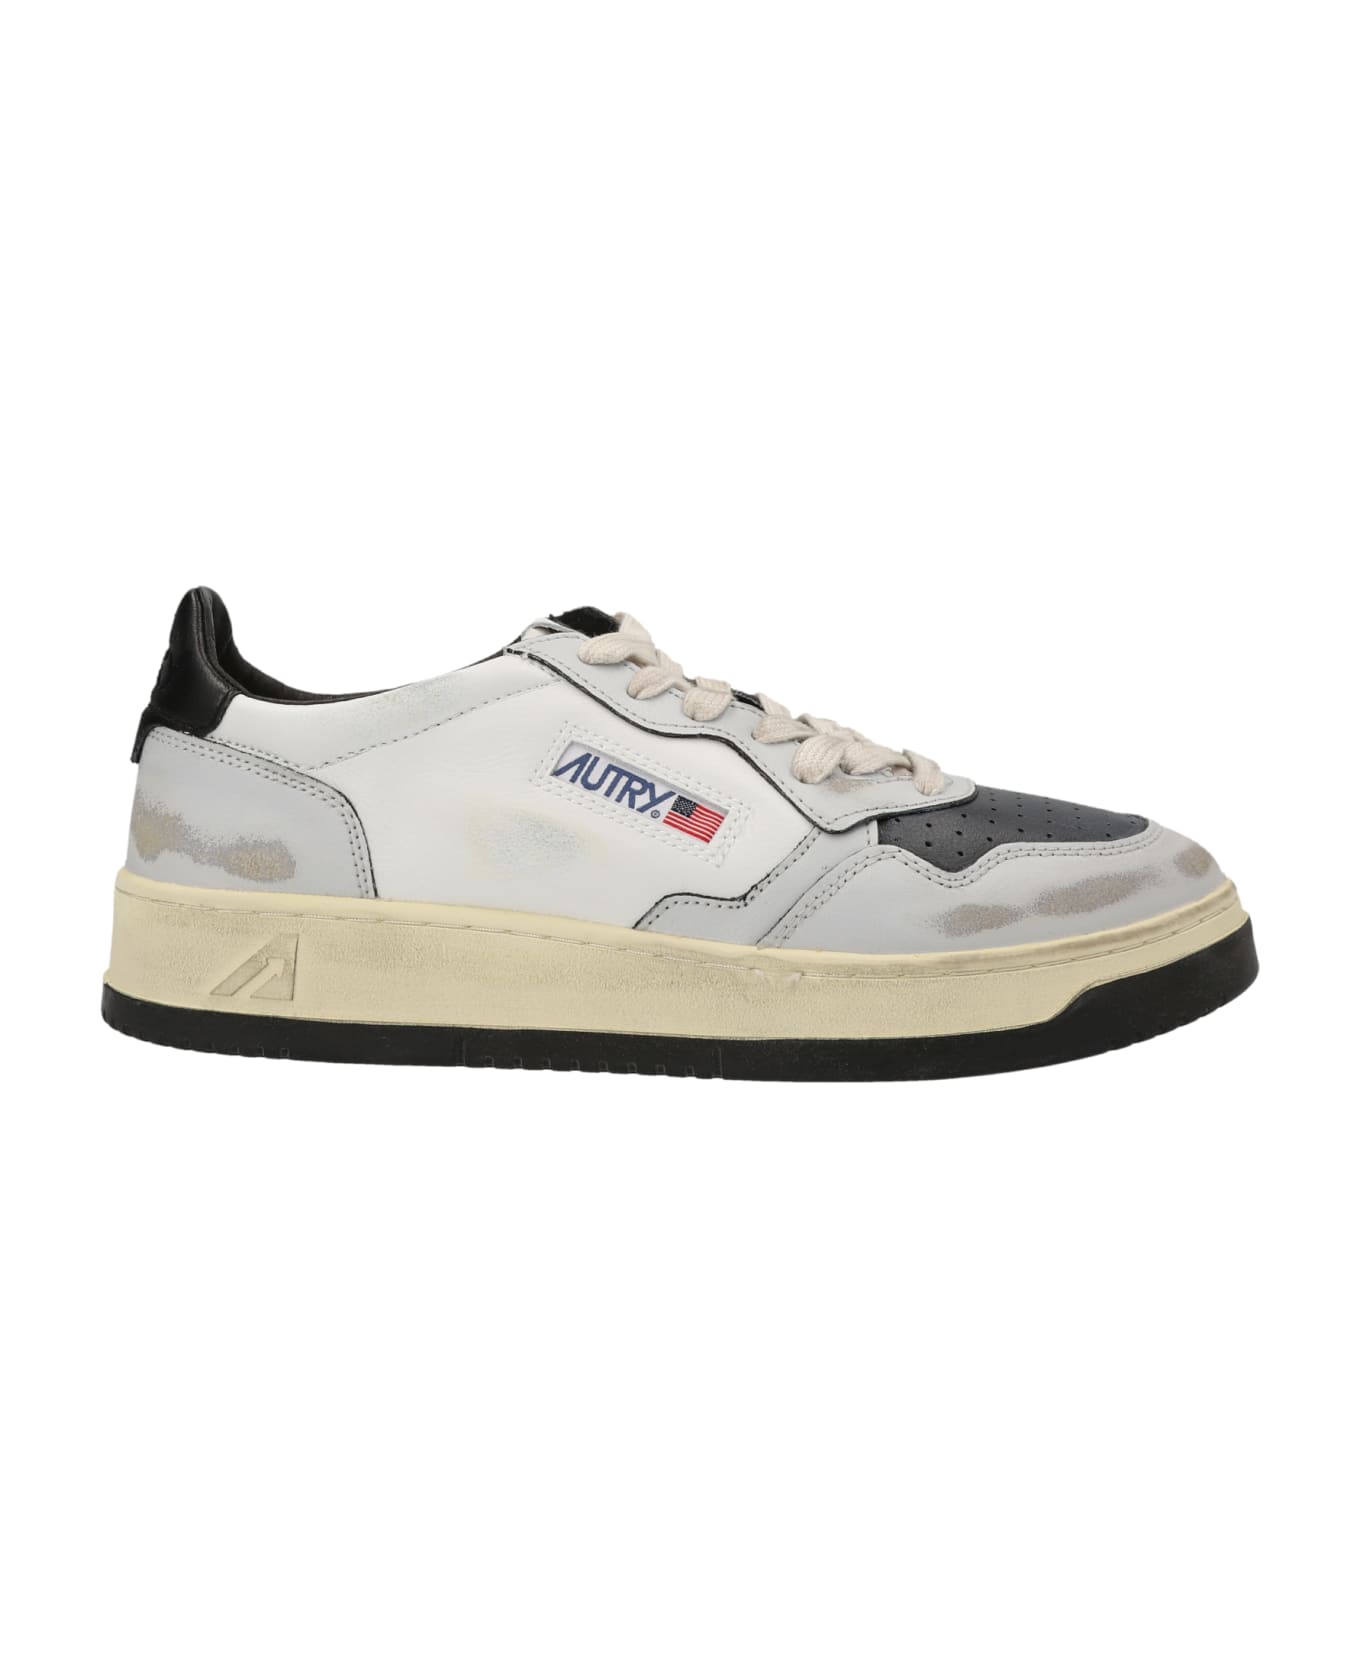 Autry Sup Vint Sneakers In White Leather - white スニーカー